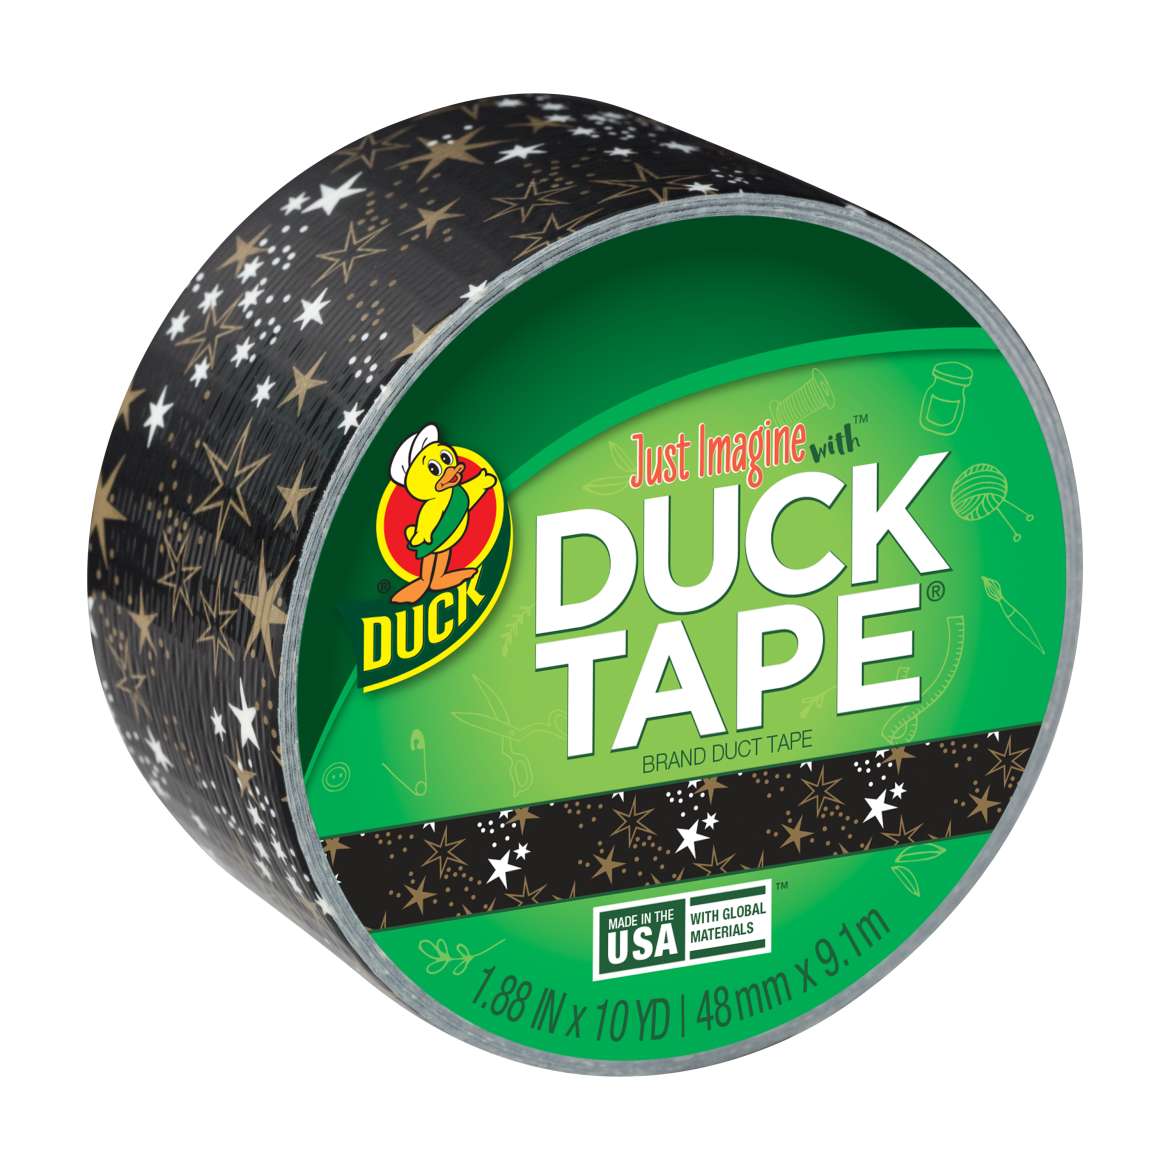 Printed Duck Tape® Brand Duct Tape - Metallic Gold Stars, 1.88 in. x 10 yd.